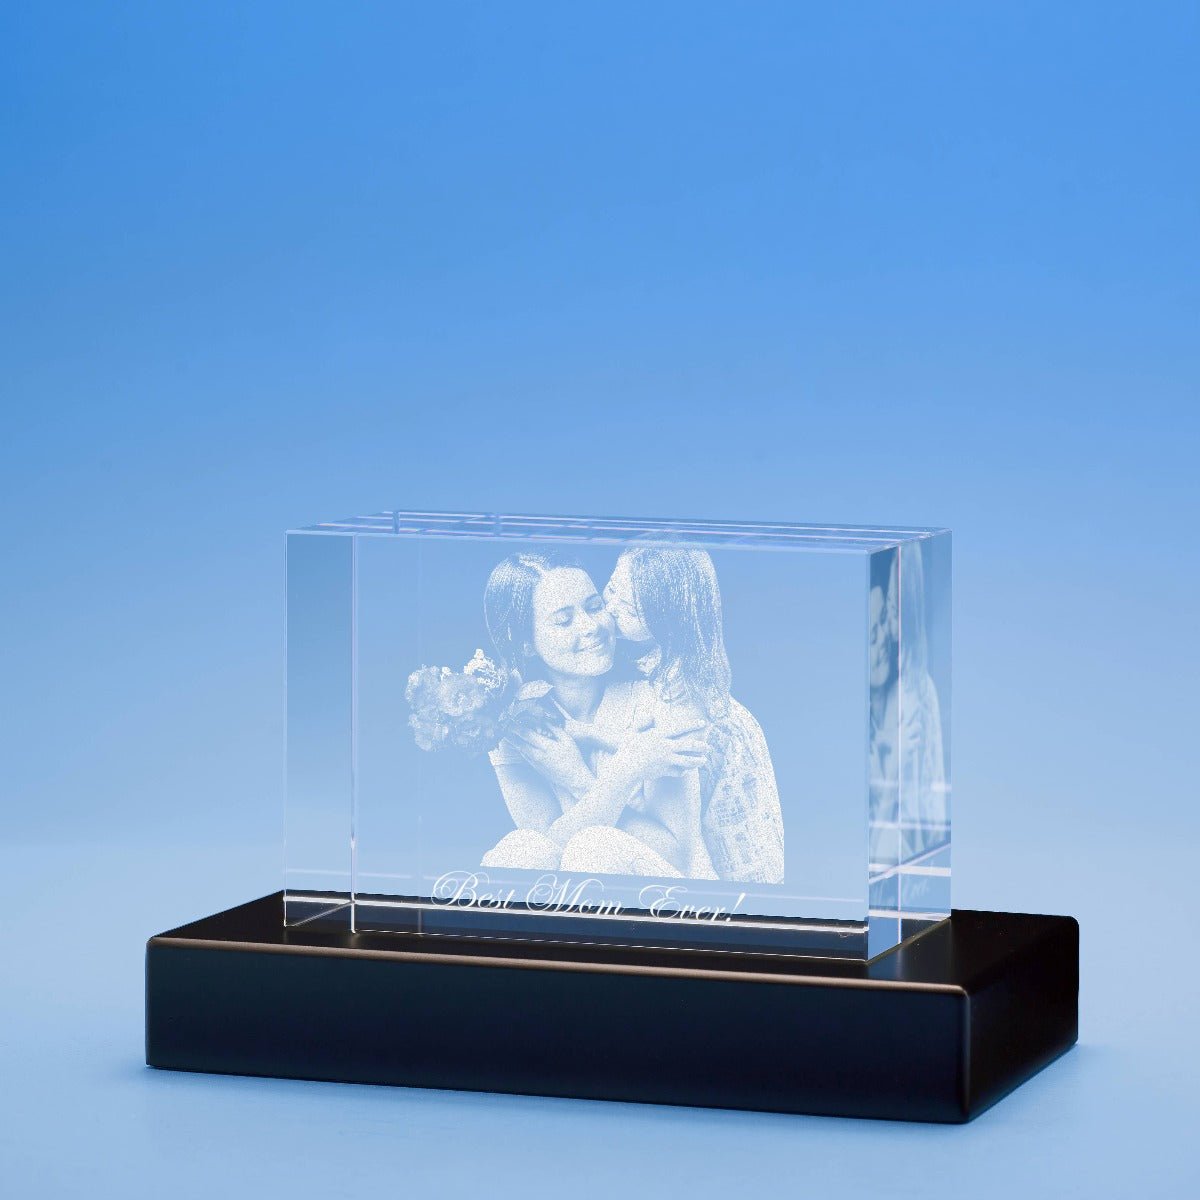 Mother's Day Brick Crystal, 3D Engraved